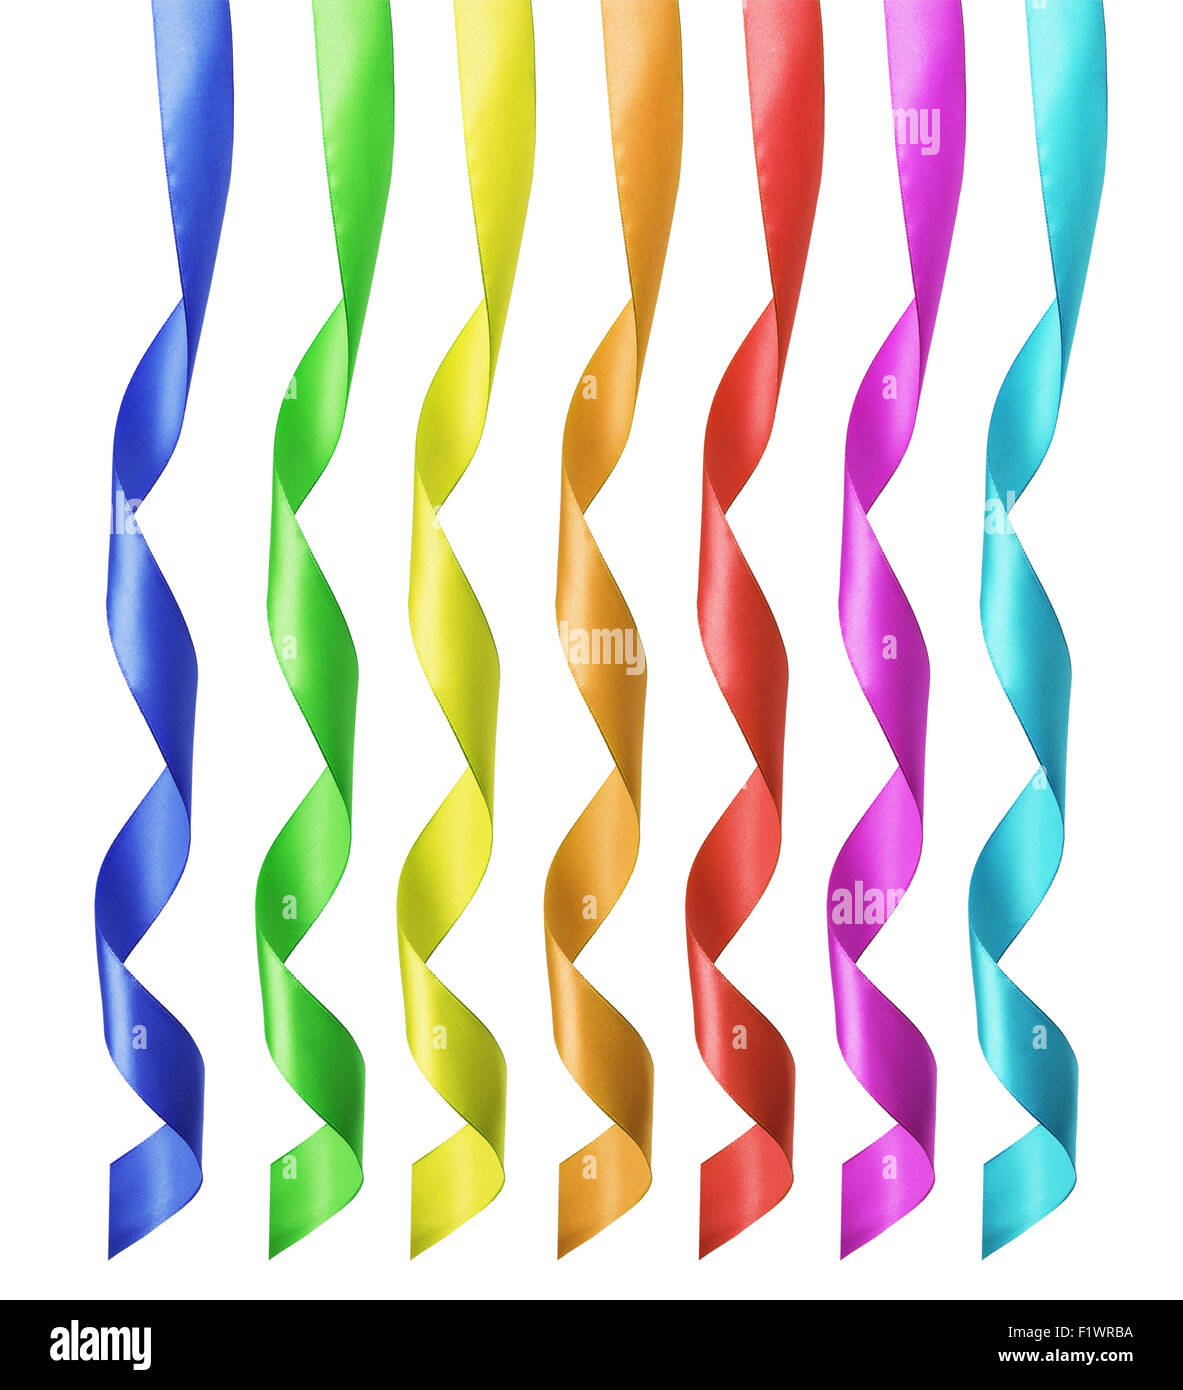 colorful ribbons isolated on the white background. Stock Photo